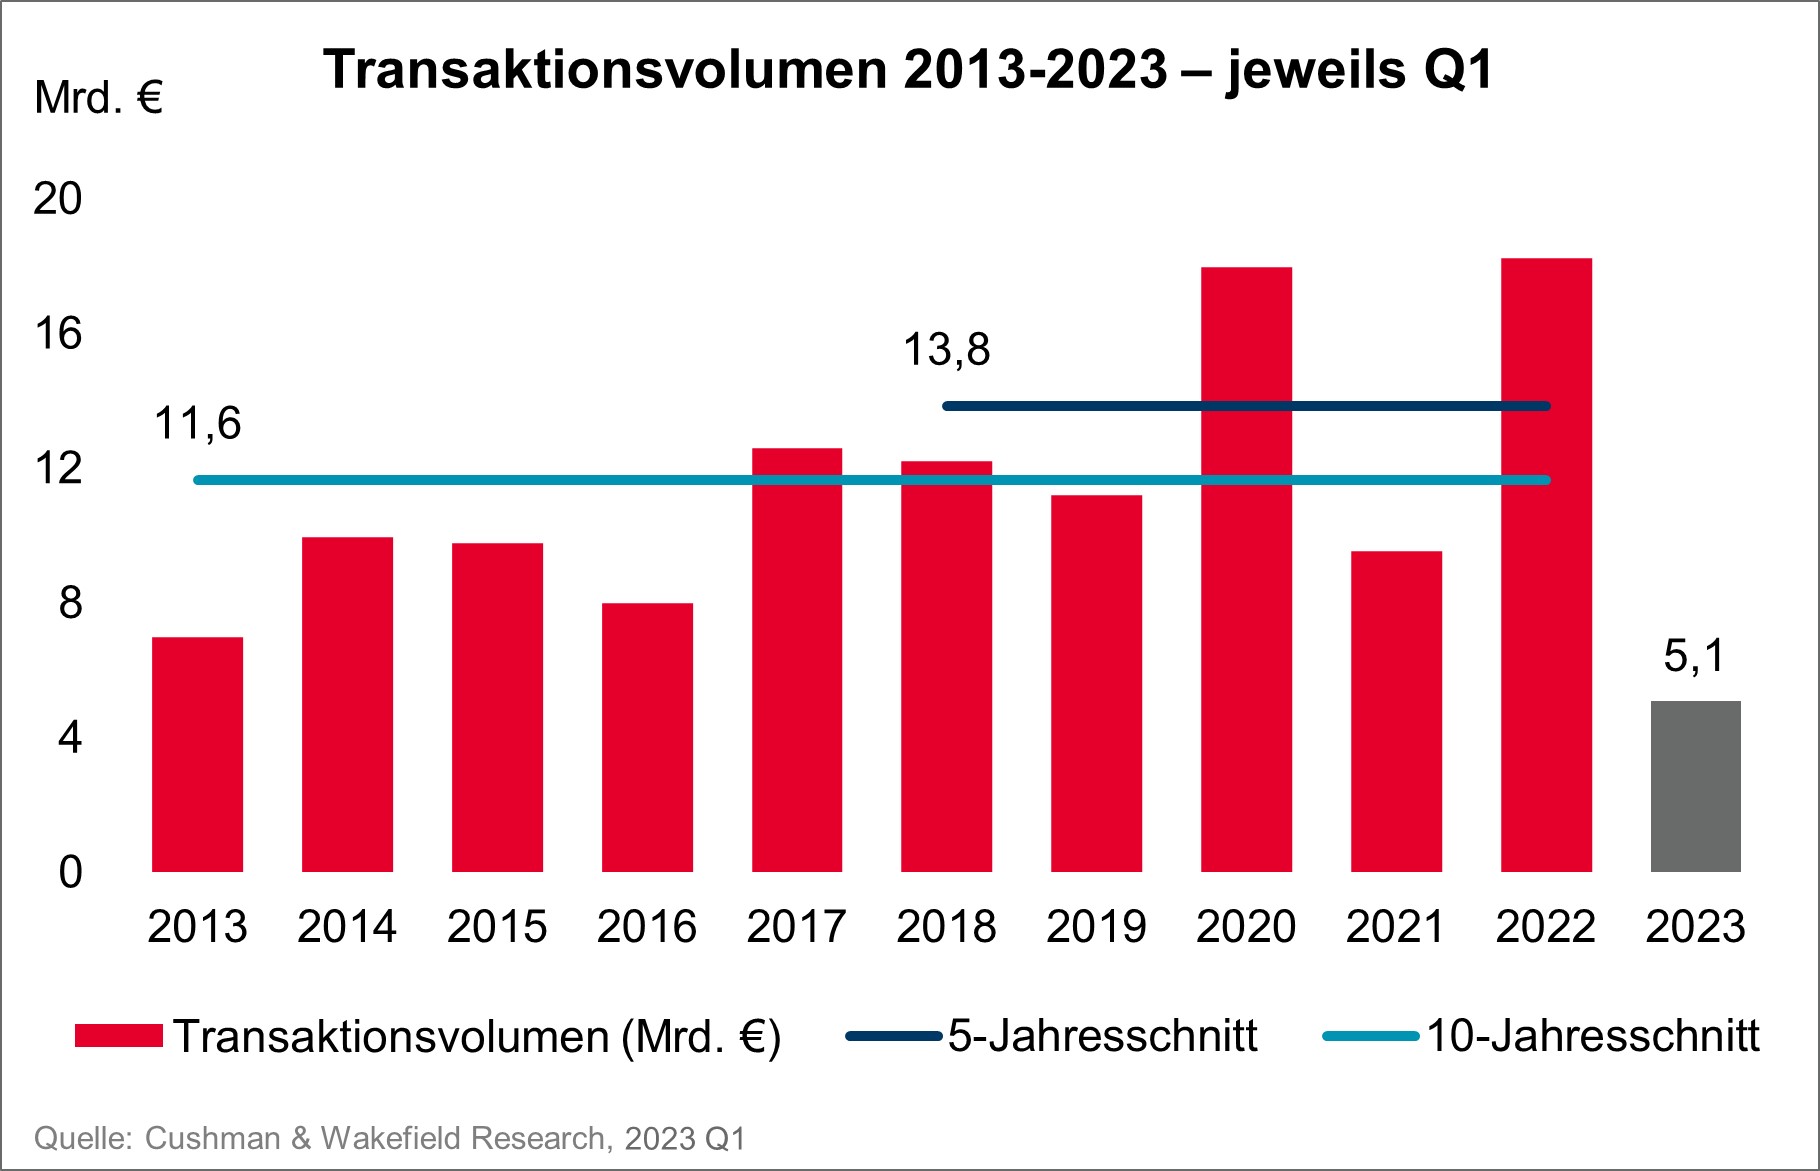 Investment Germany Q1 2023